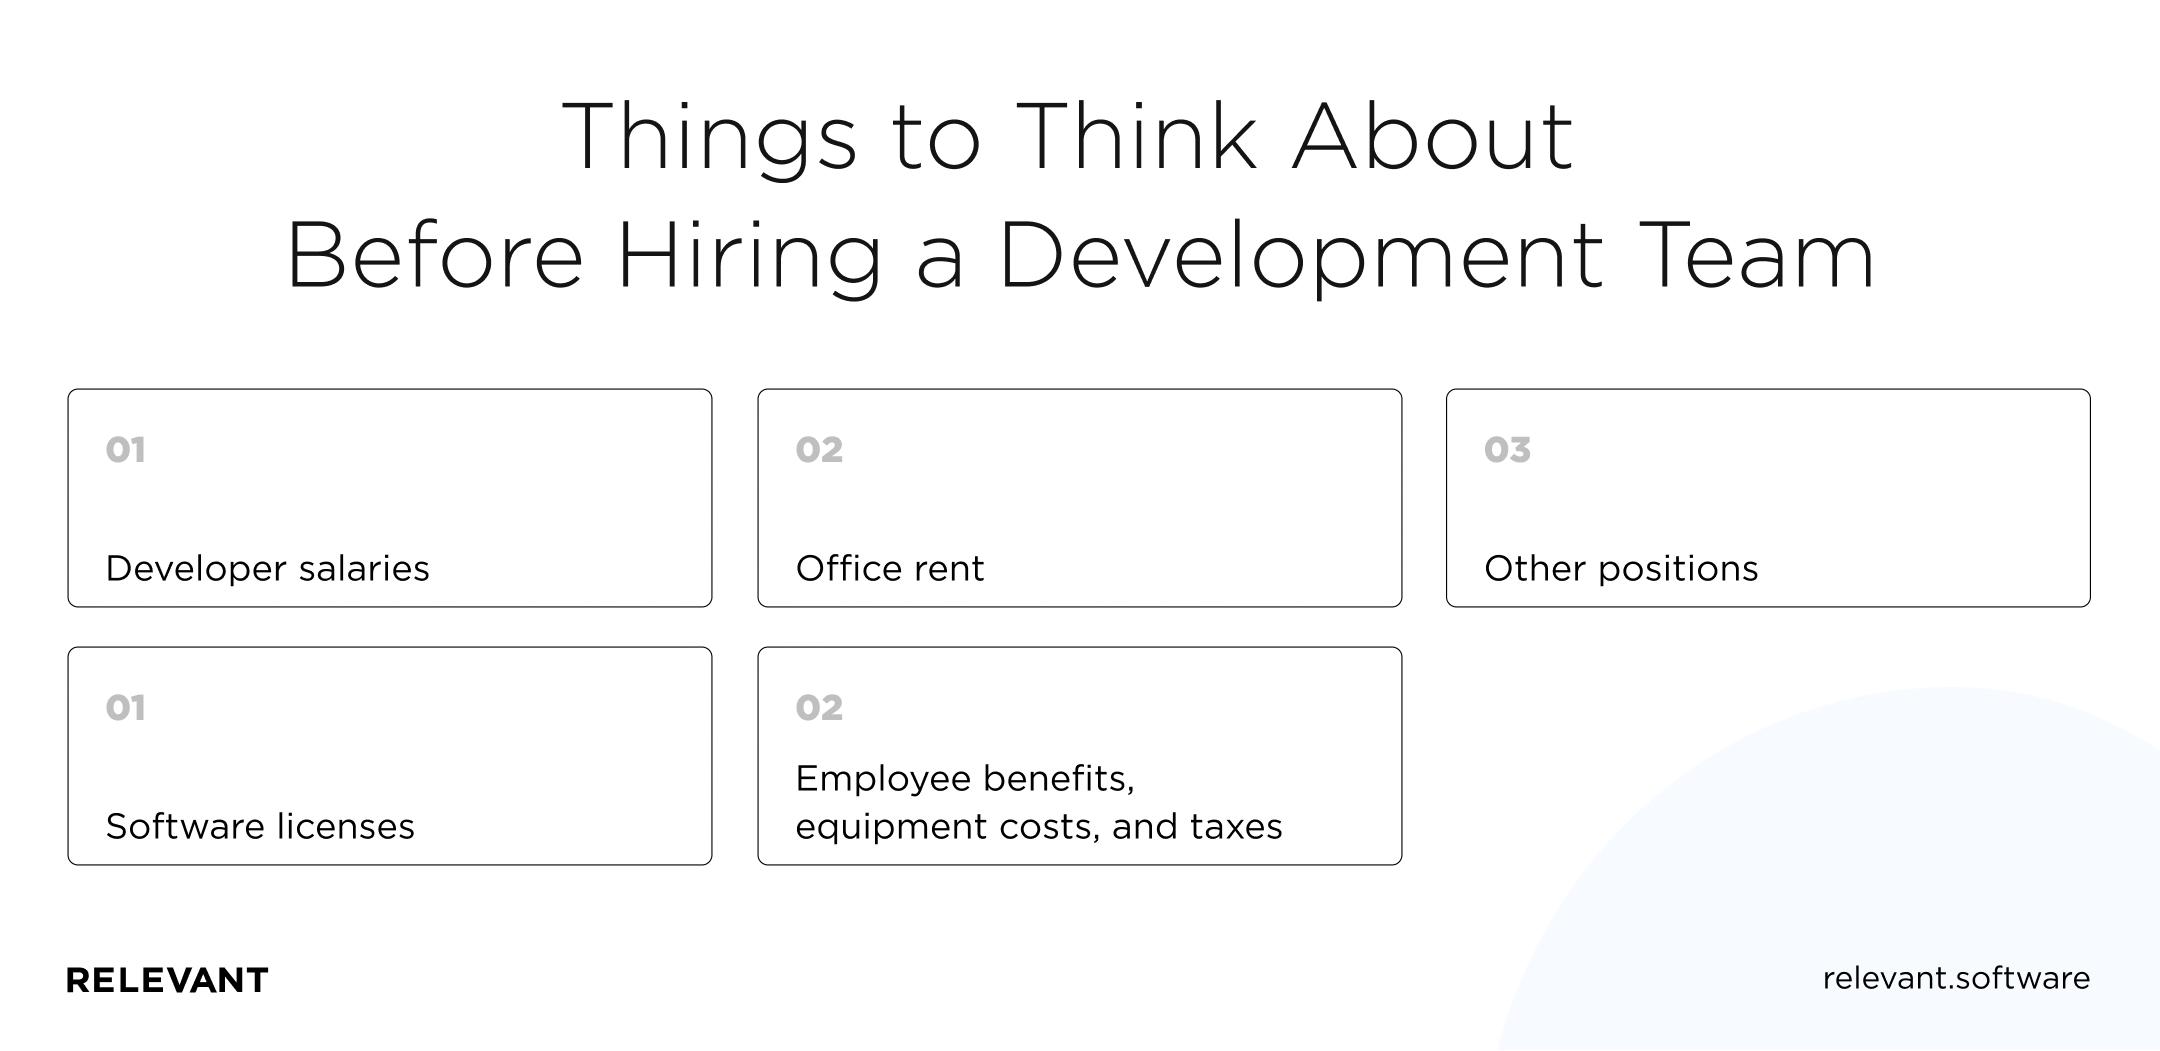 Things to Think About Before Hiring a Development Team